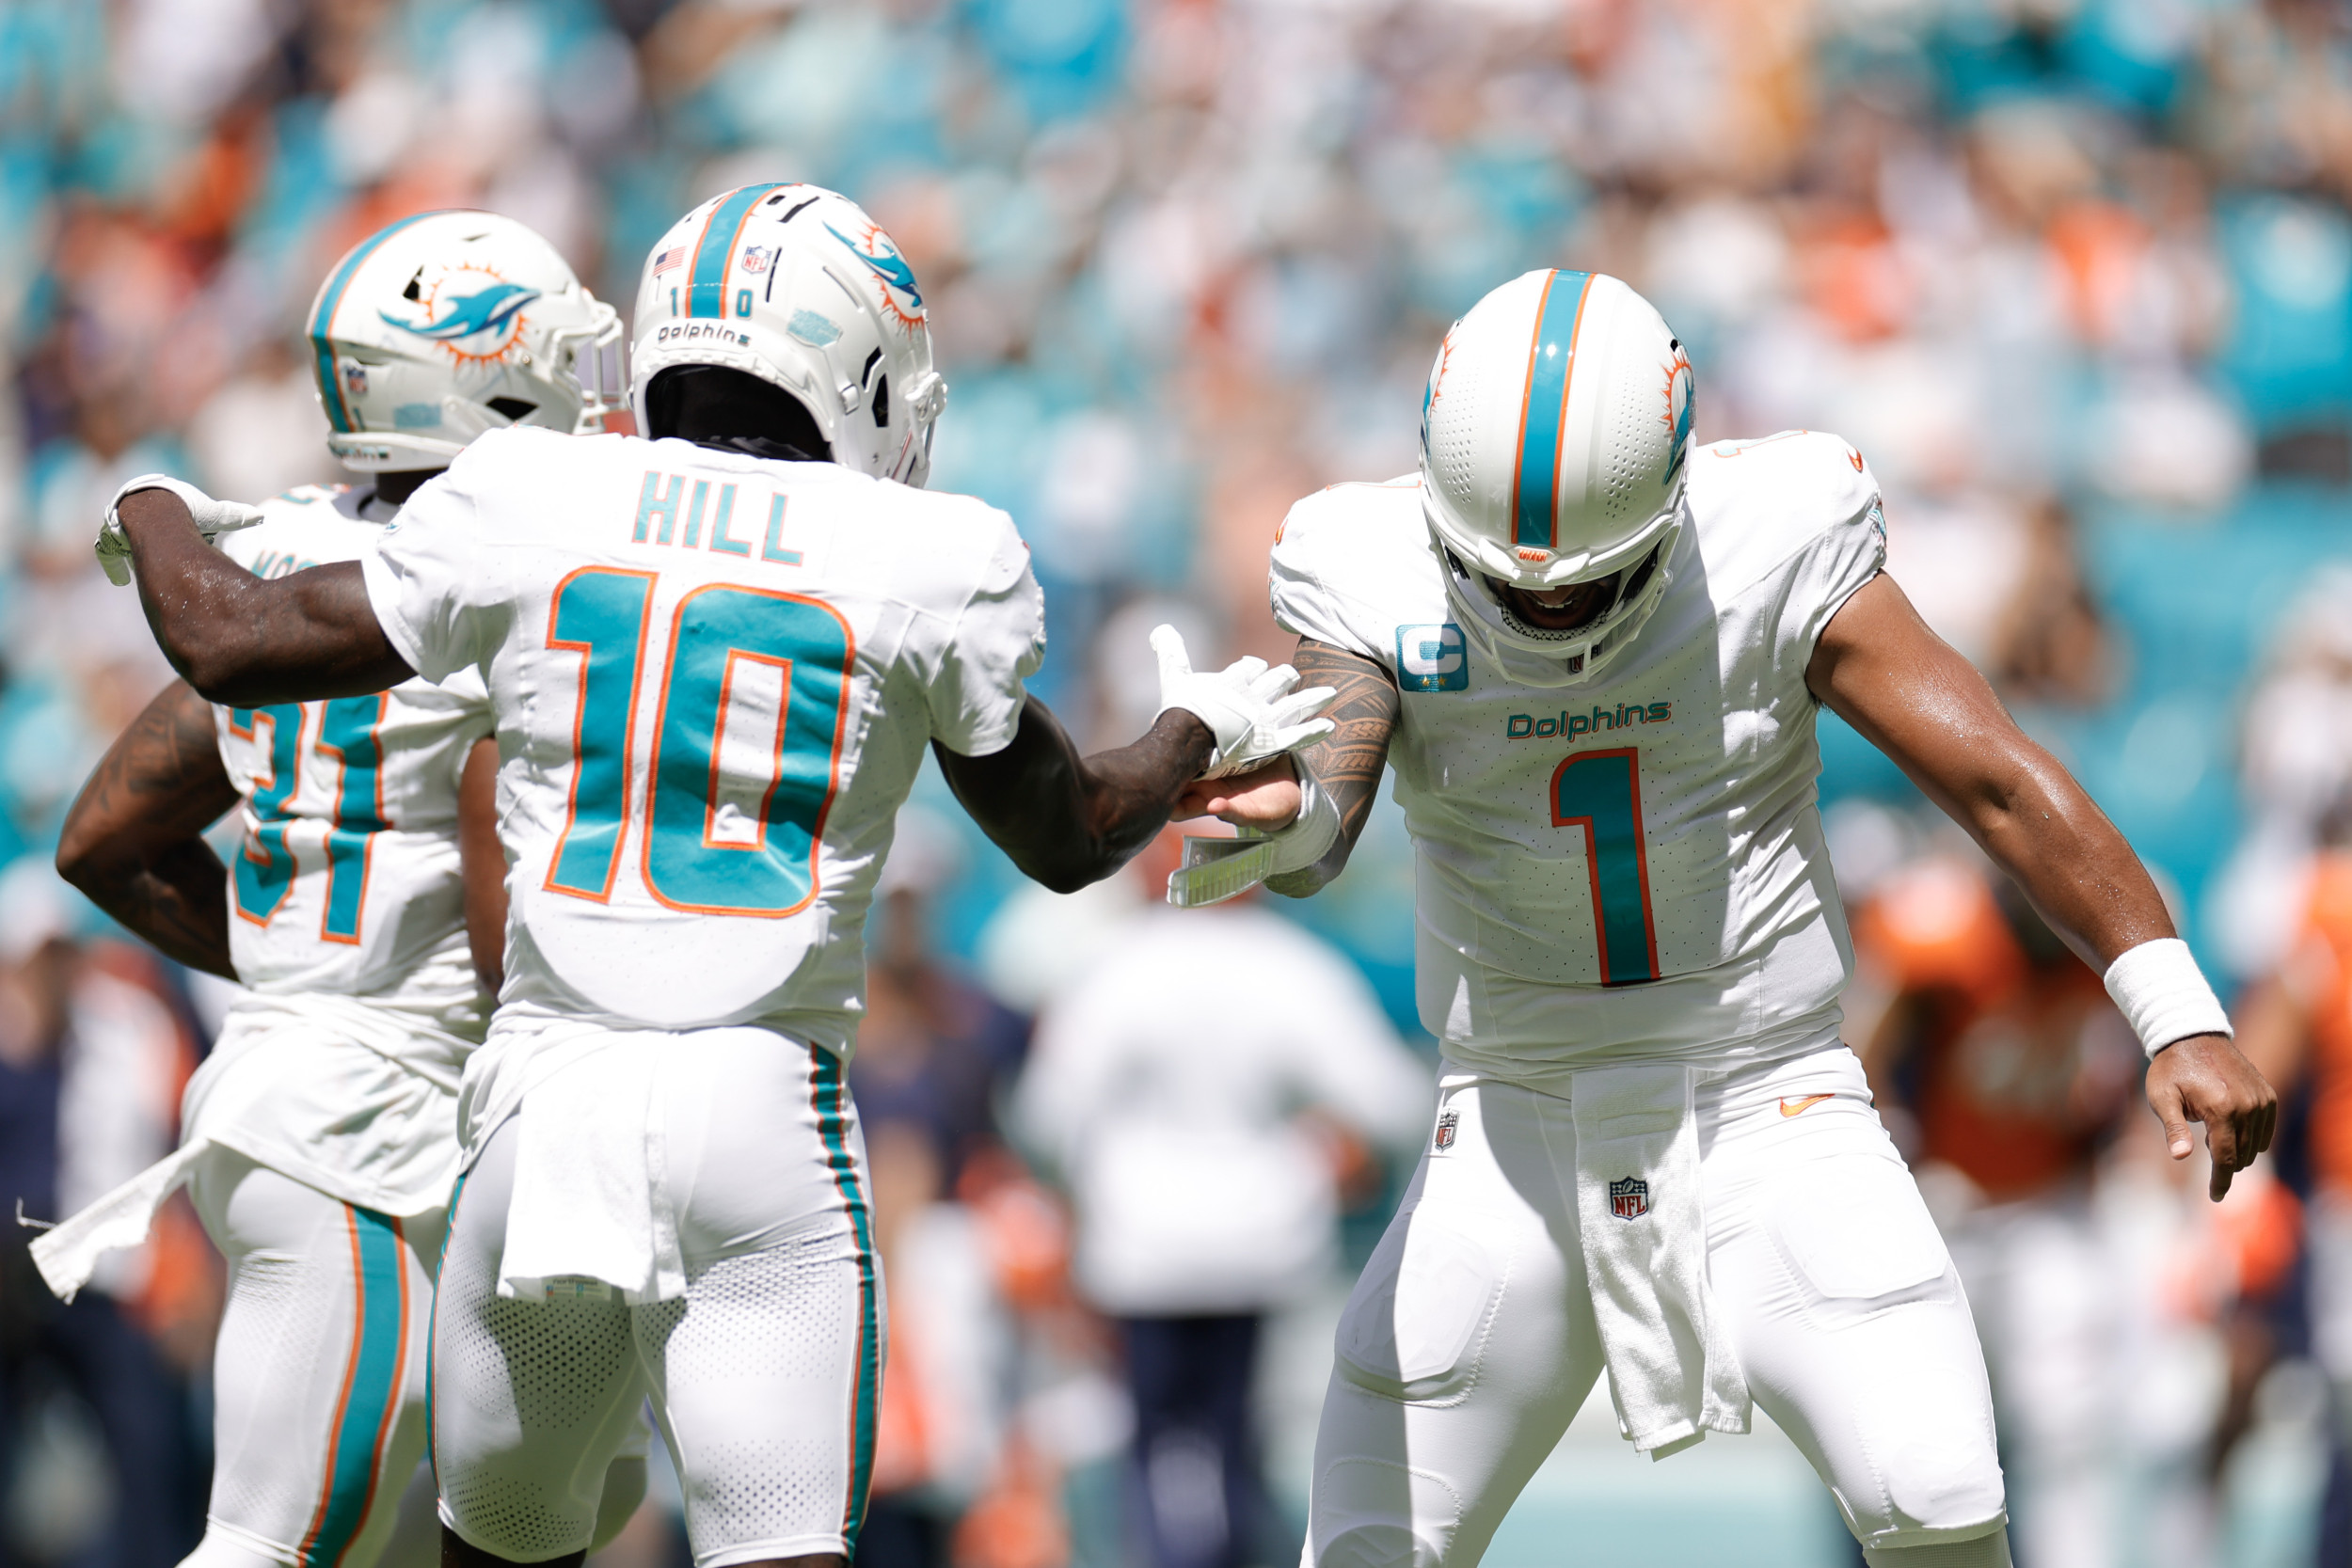 How to Watch Bills vs. Dolphins Week 4 NFL Game: TV, Betting Info